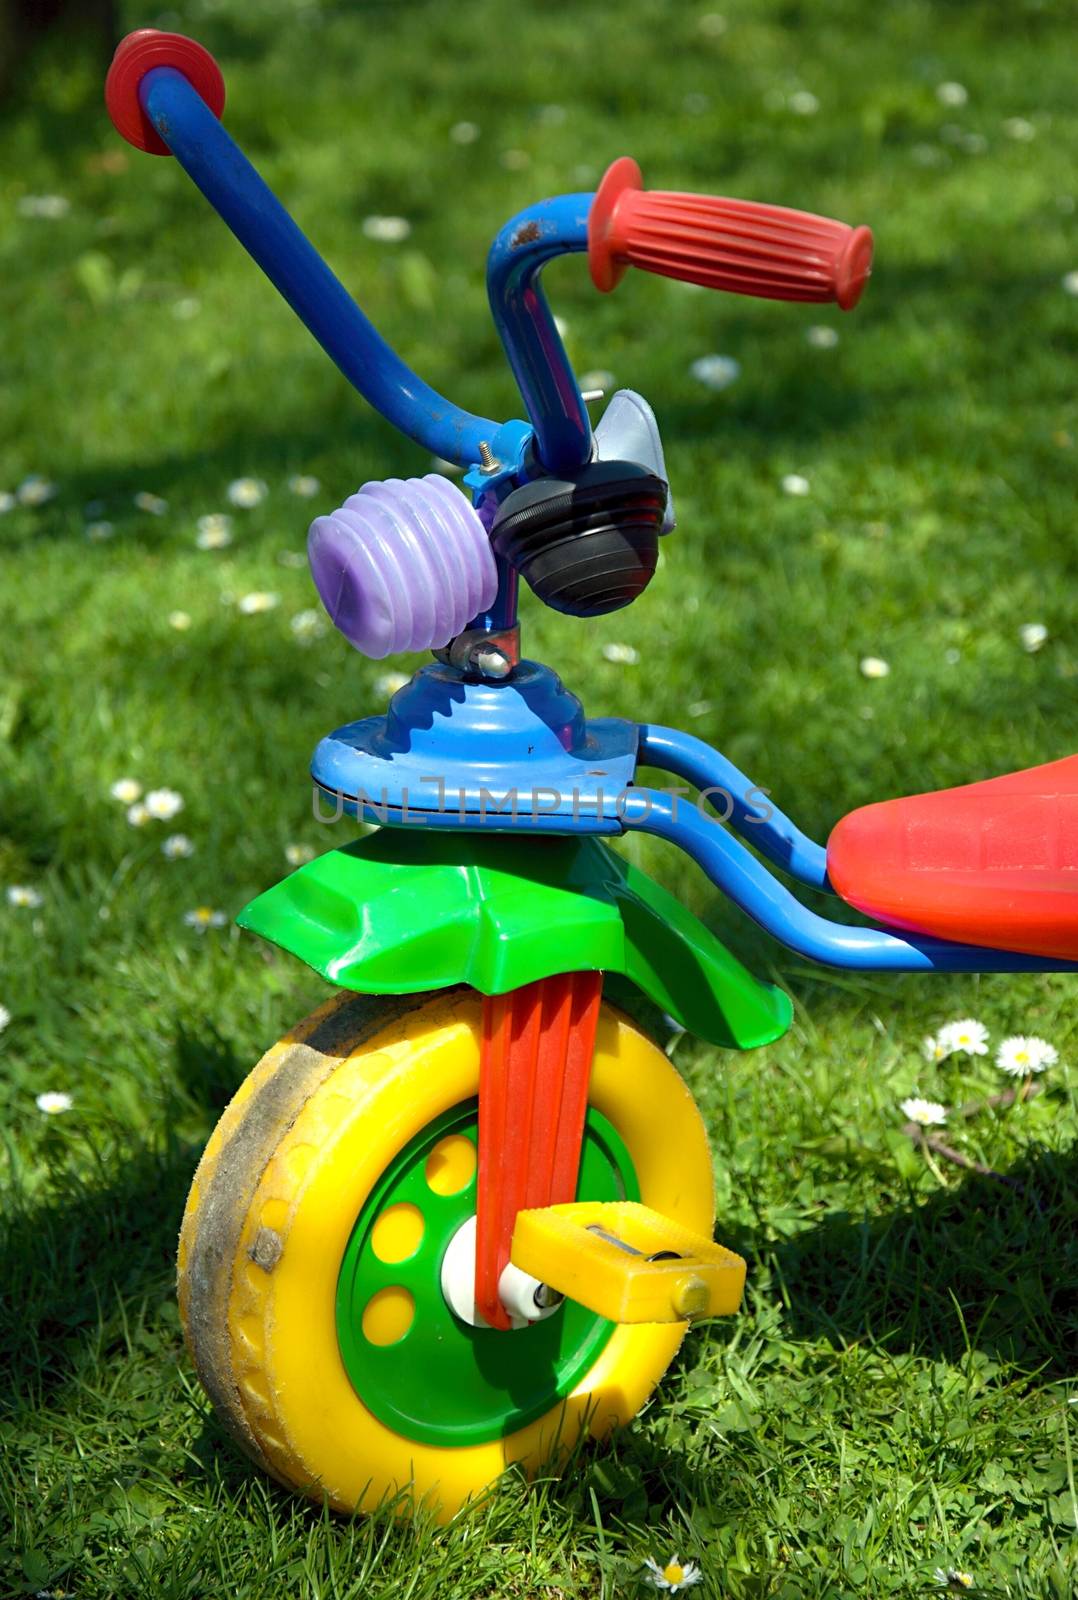 Tricycle in the garden. by hamik